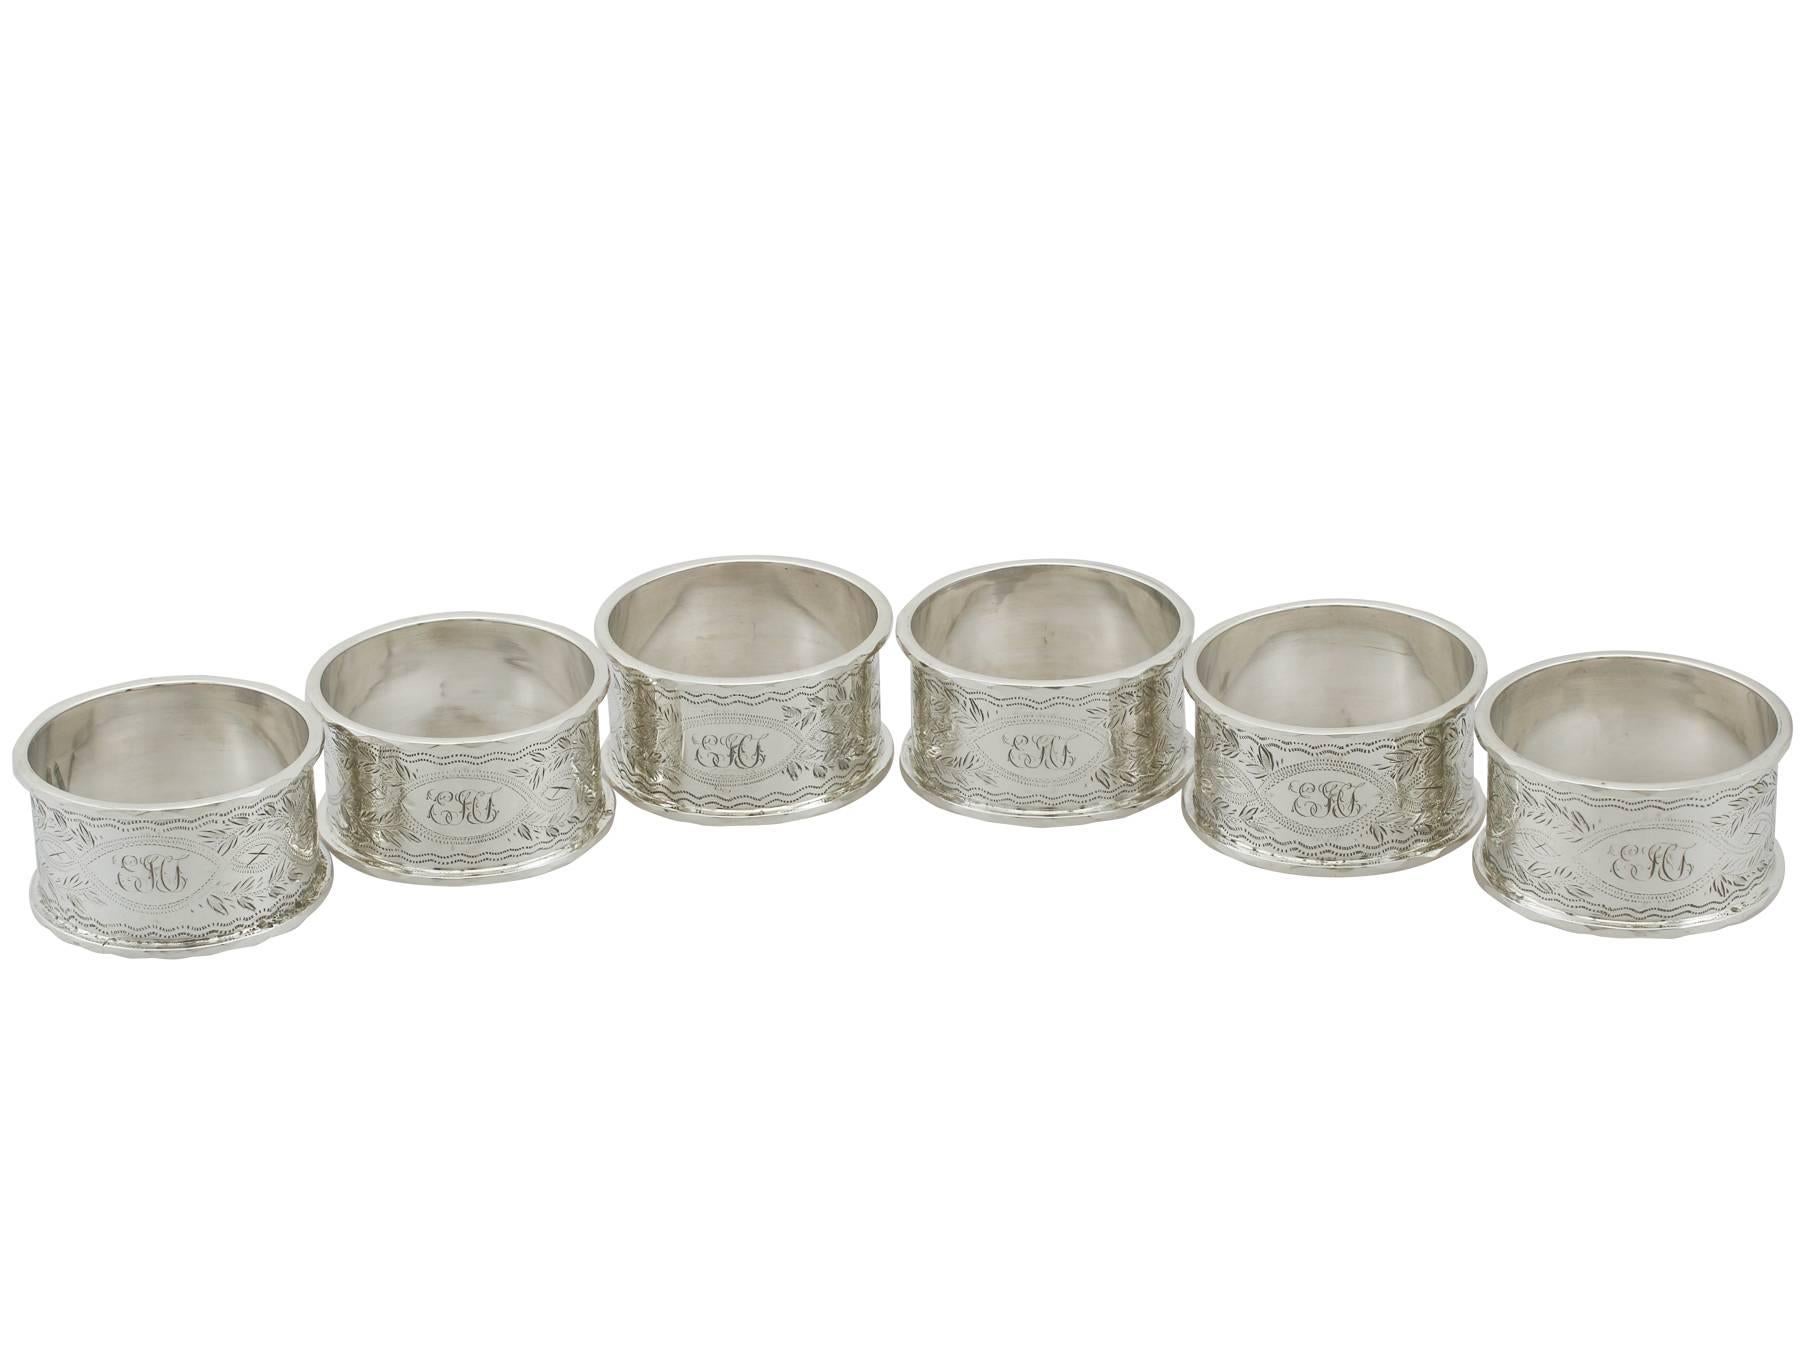 An exceptional, fine and impressive set of six antique Edwardian English sterling silver napkin rings - boxed by Walker & Hall; an addition to our dining silverware collection.

This exceptional set of antique English sterling silver napkin rings